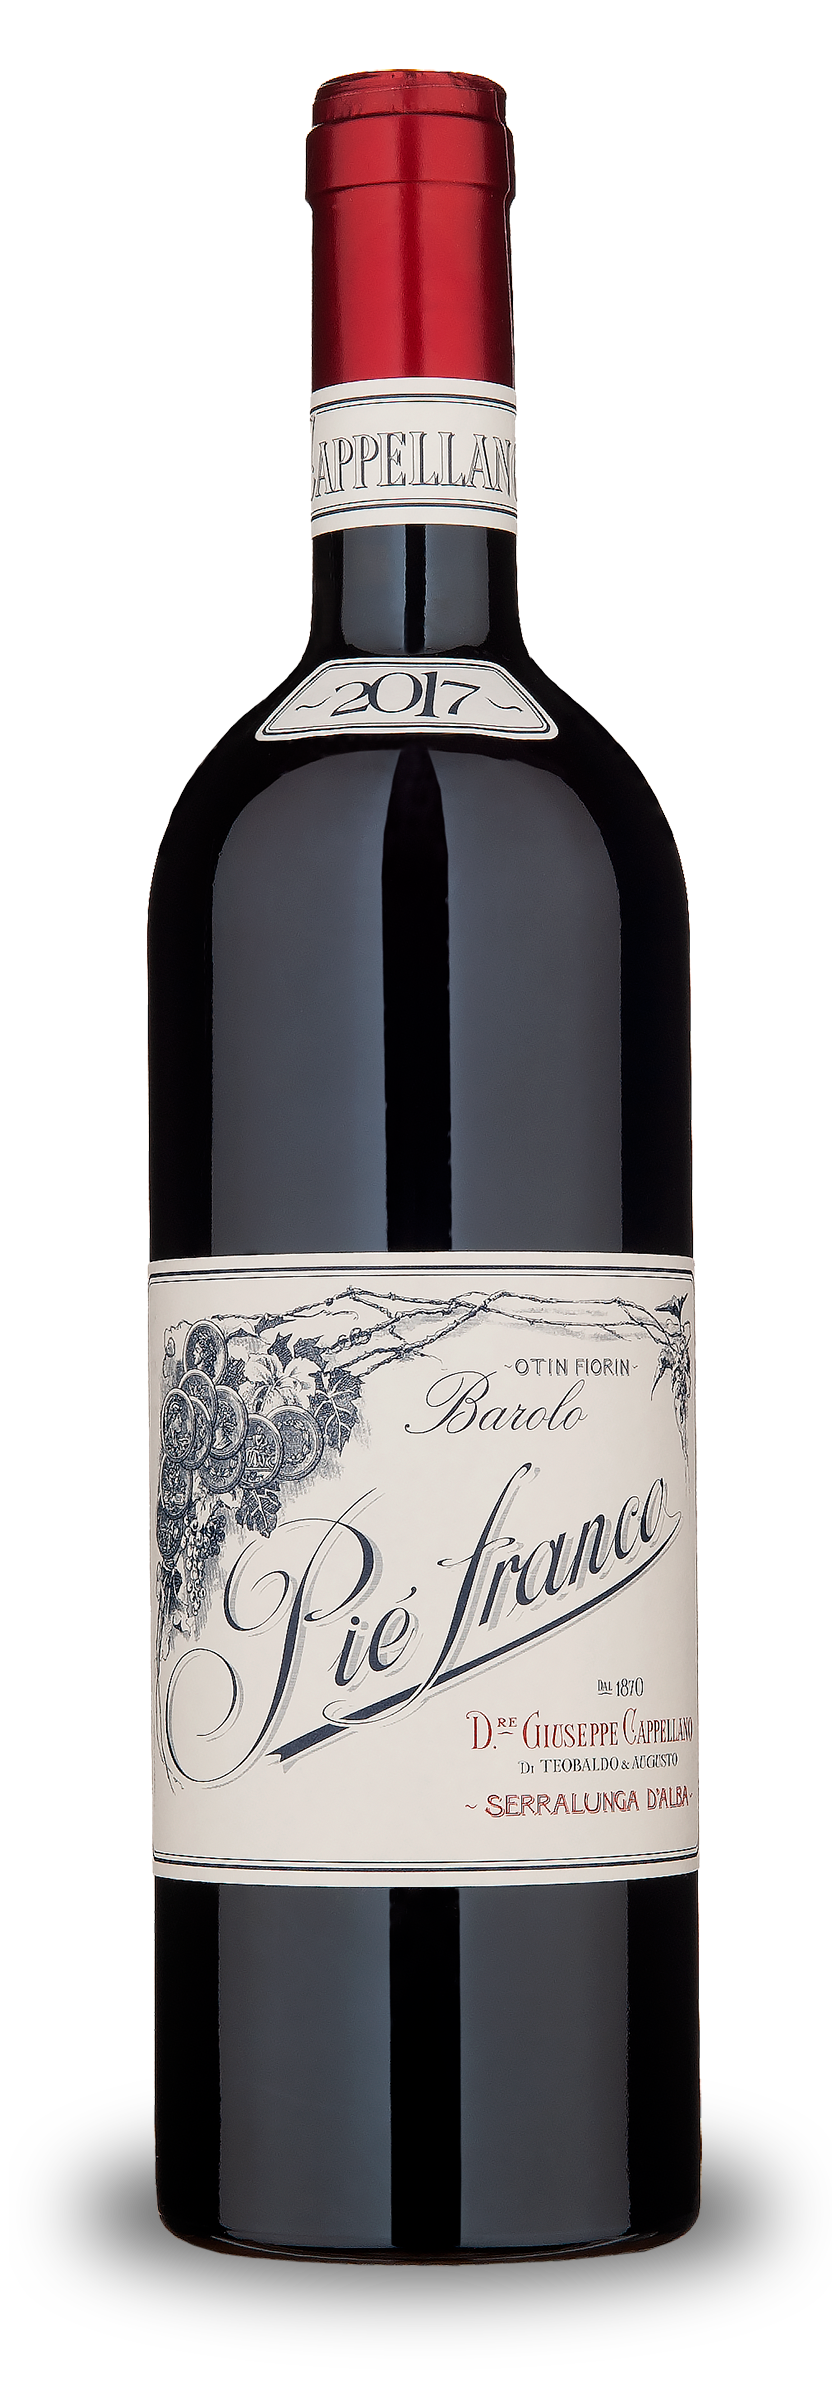 Barolo Piè Franco 2017 1,5l - ONLY ON PRE-ALLOCATION Contact us for further information (indulge@flemmings.wine)